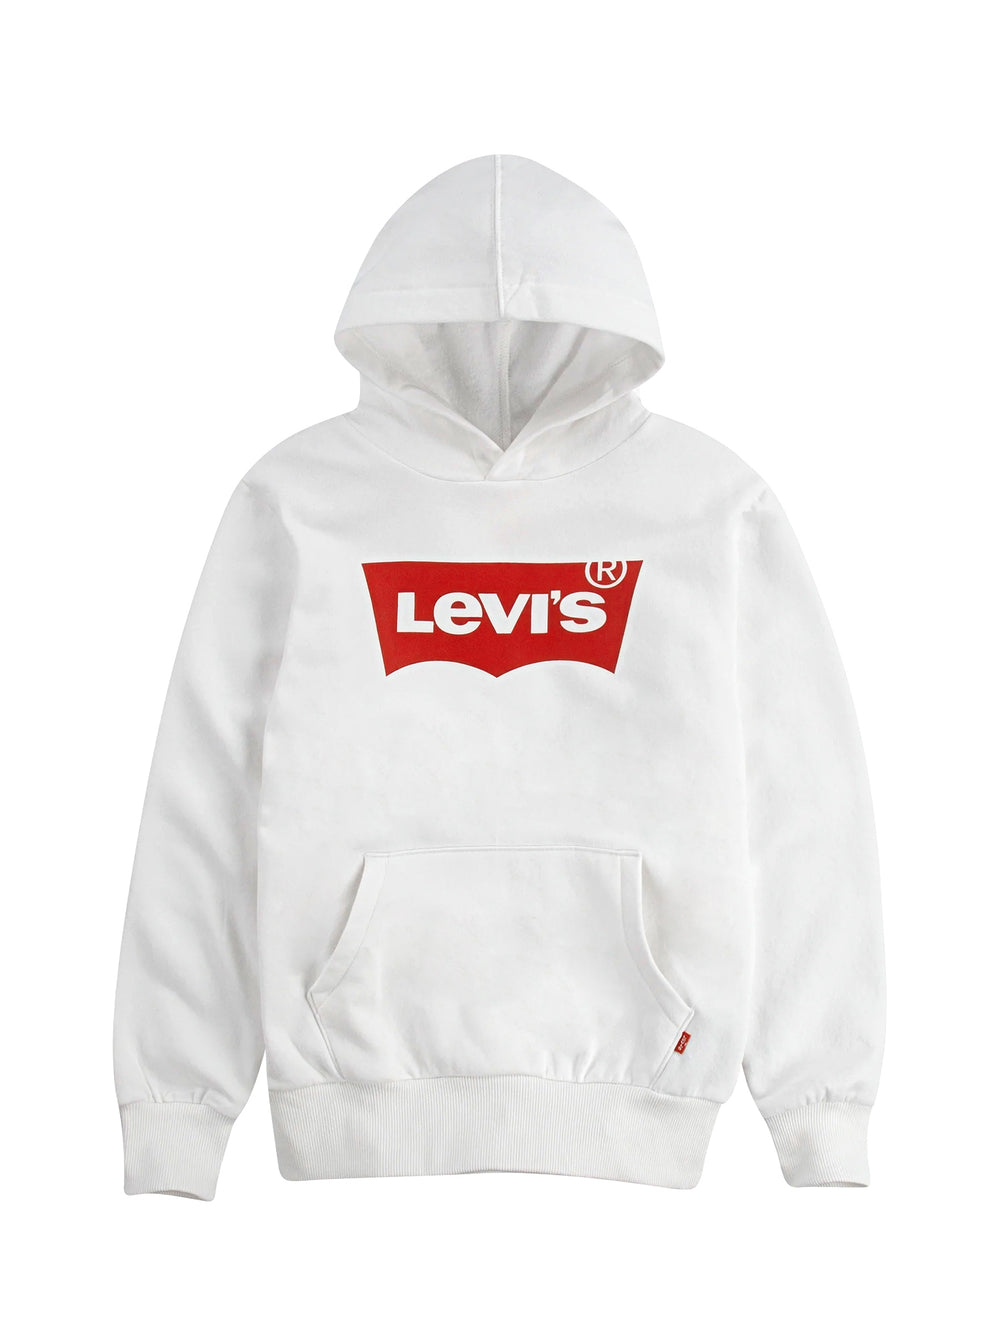 KIDS LEVIS YOUTH BOYS BATWING PULLOVER HOODIE - CLEARANCE